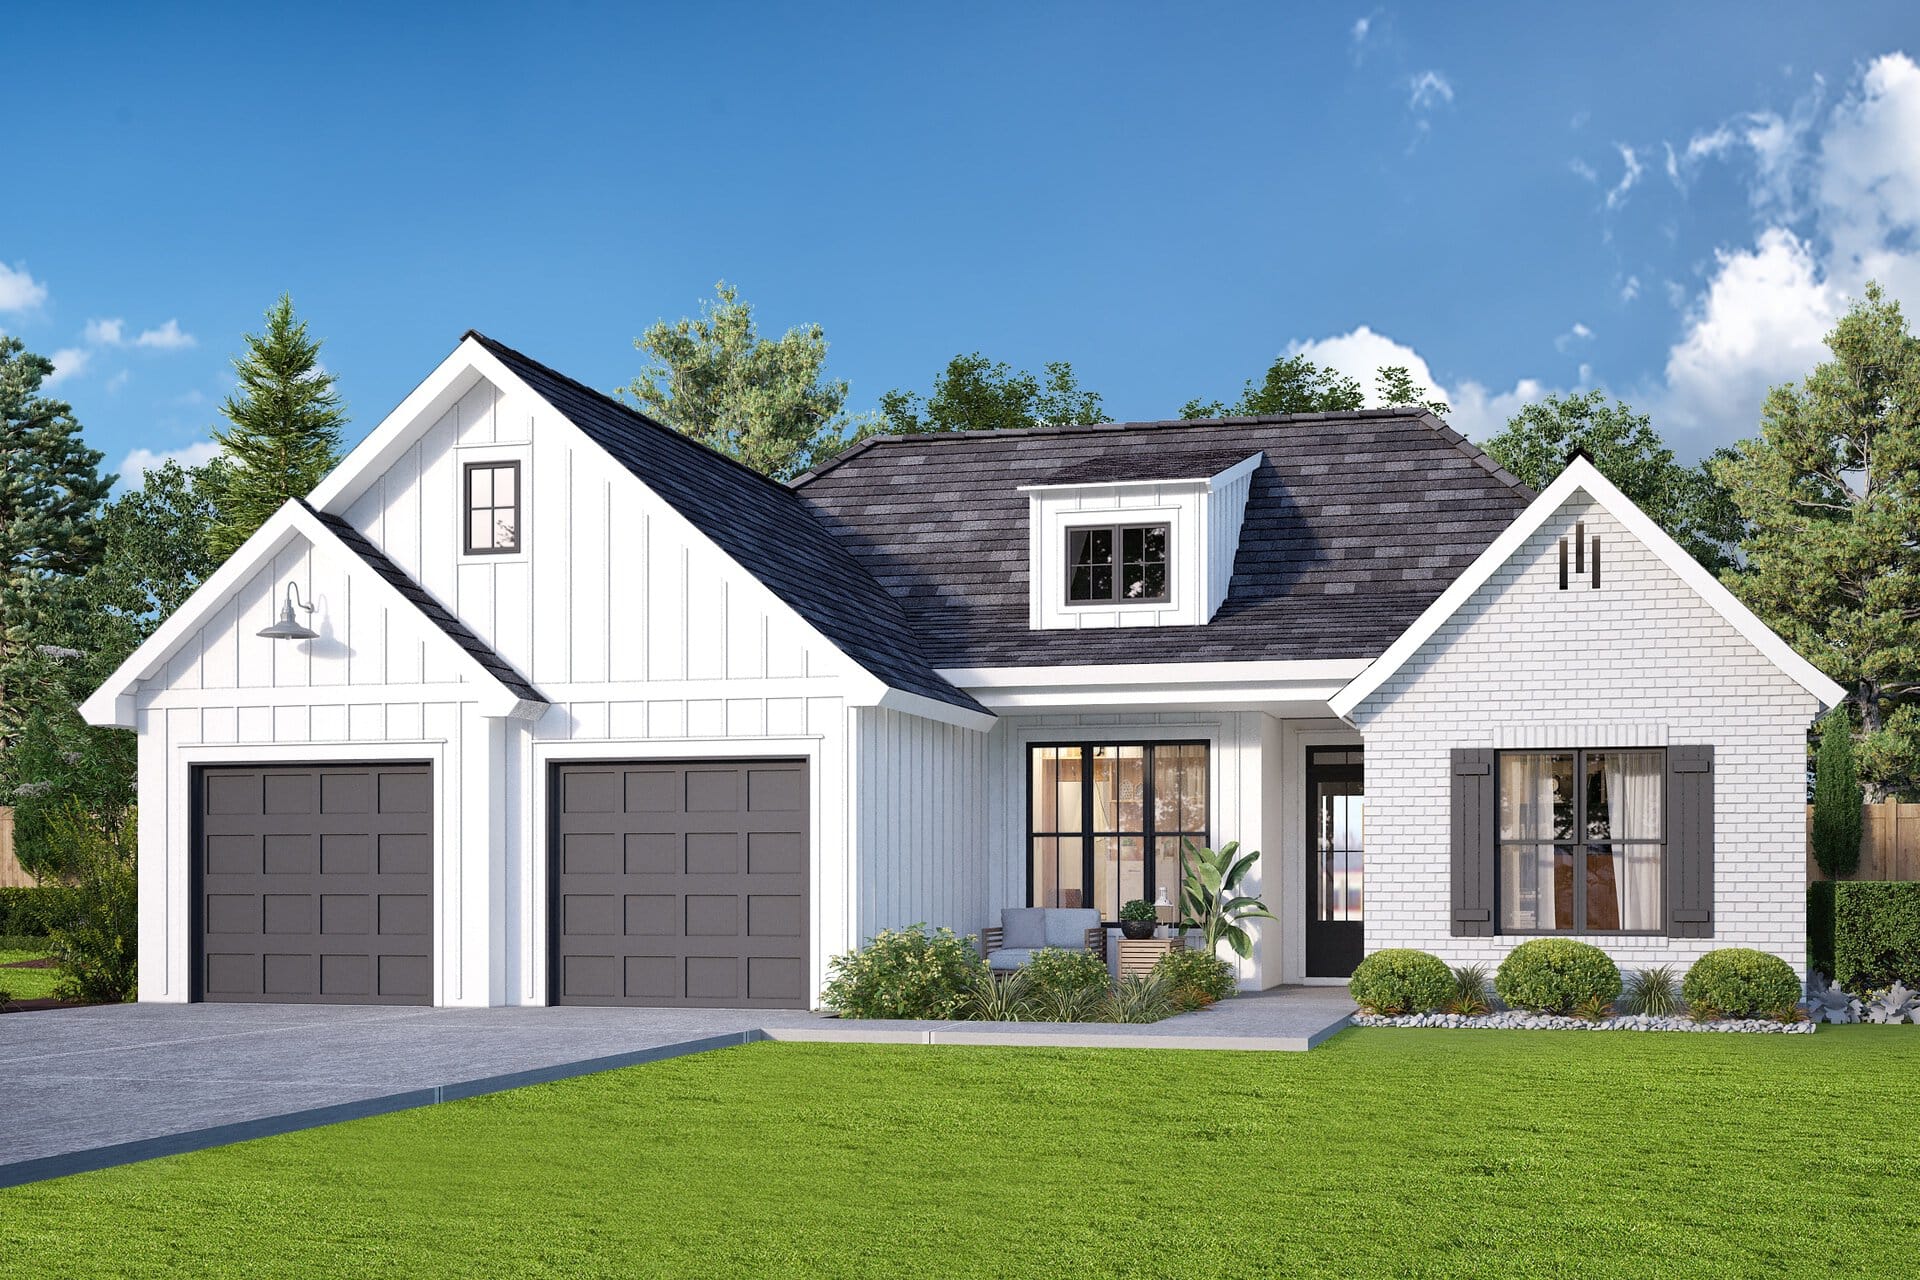 a rendering of a home with a garage and two car garage.